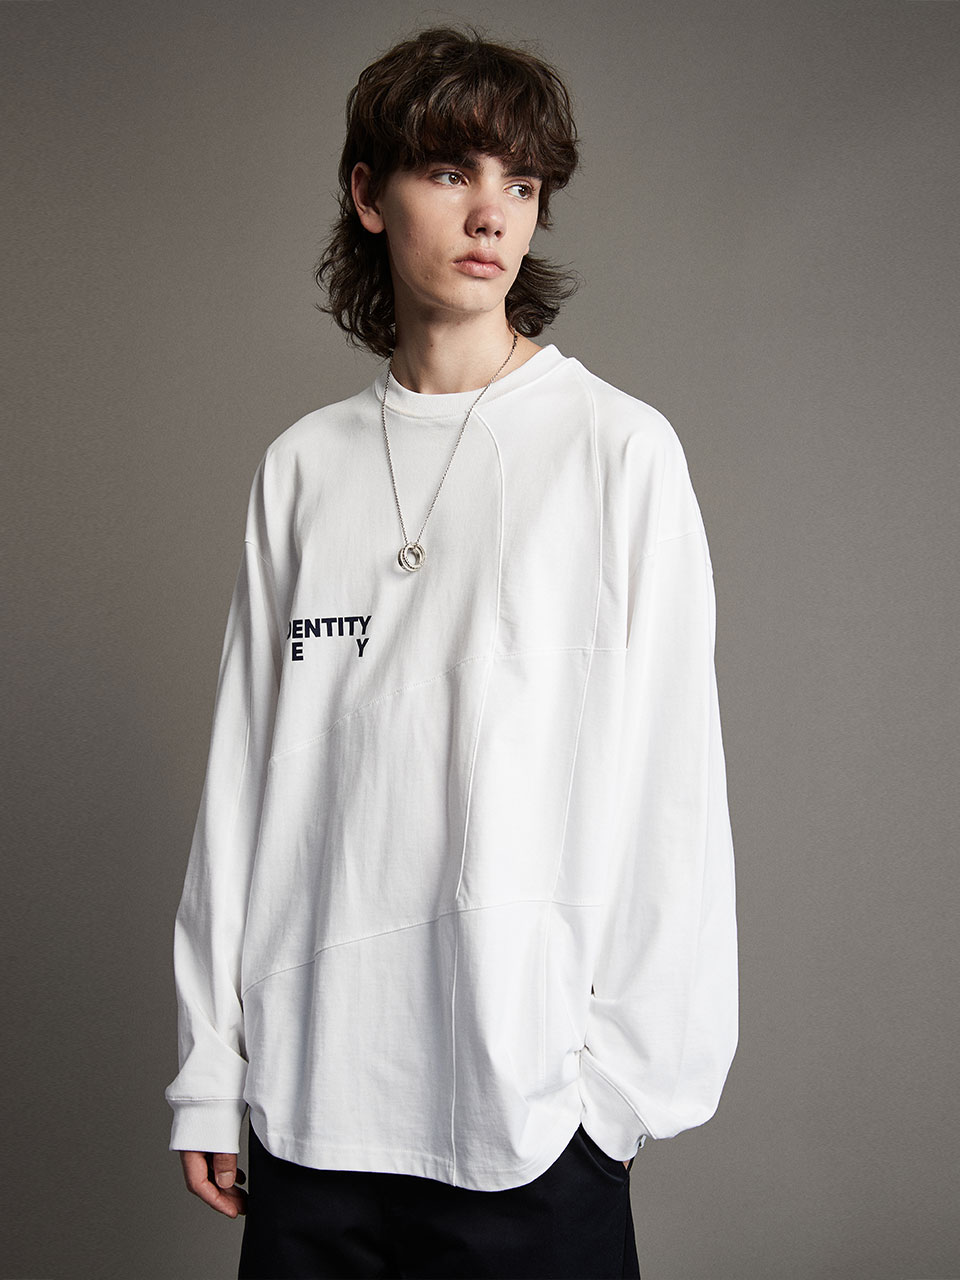 IEY - PUZZLE LONG SLEEVES T-SHIRTS White